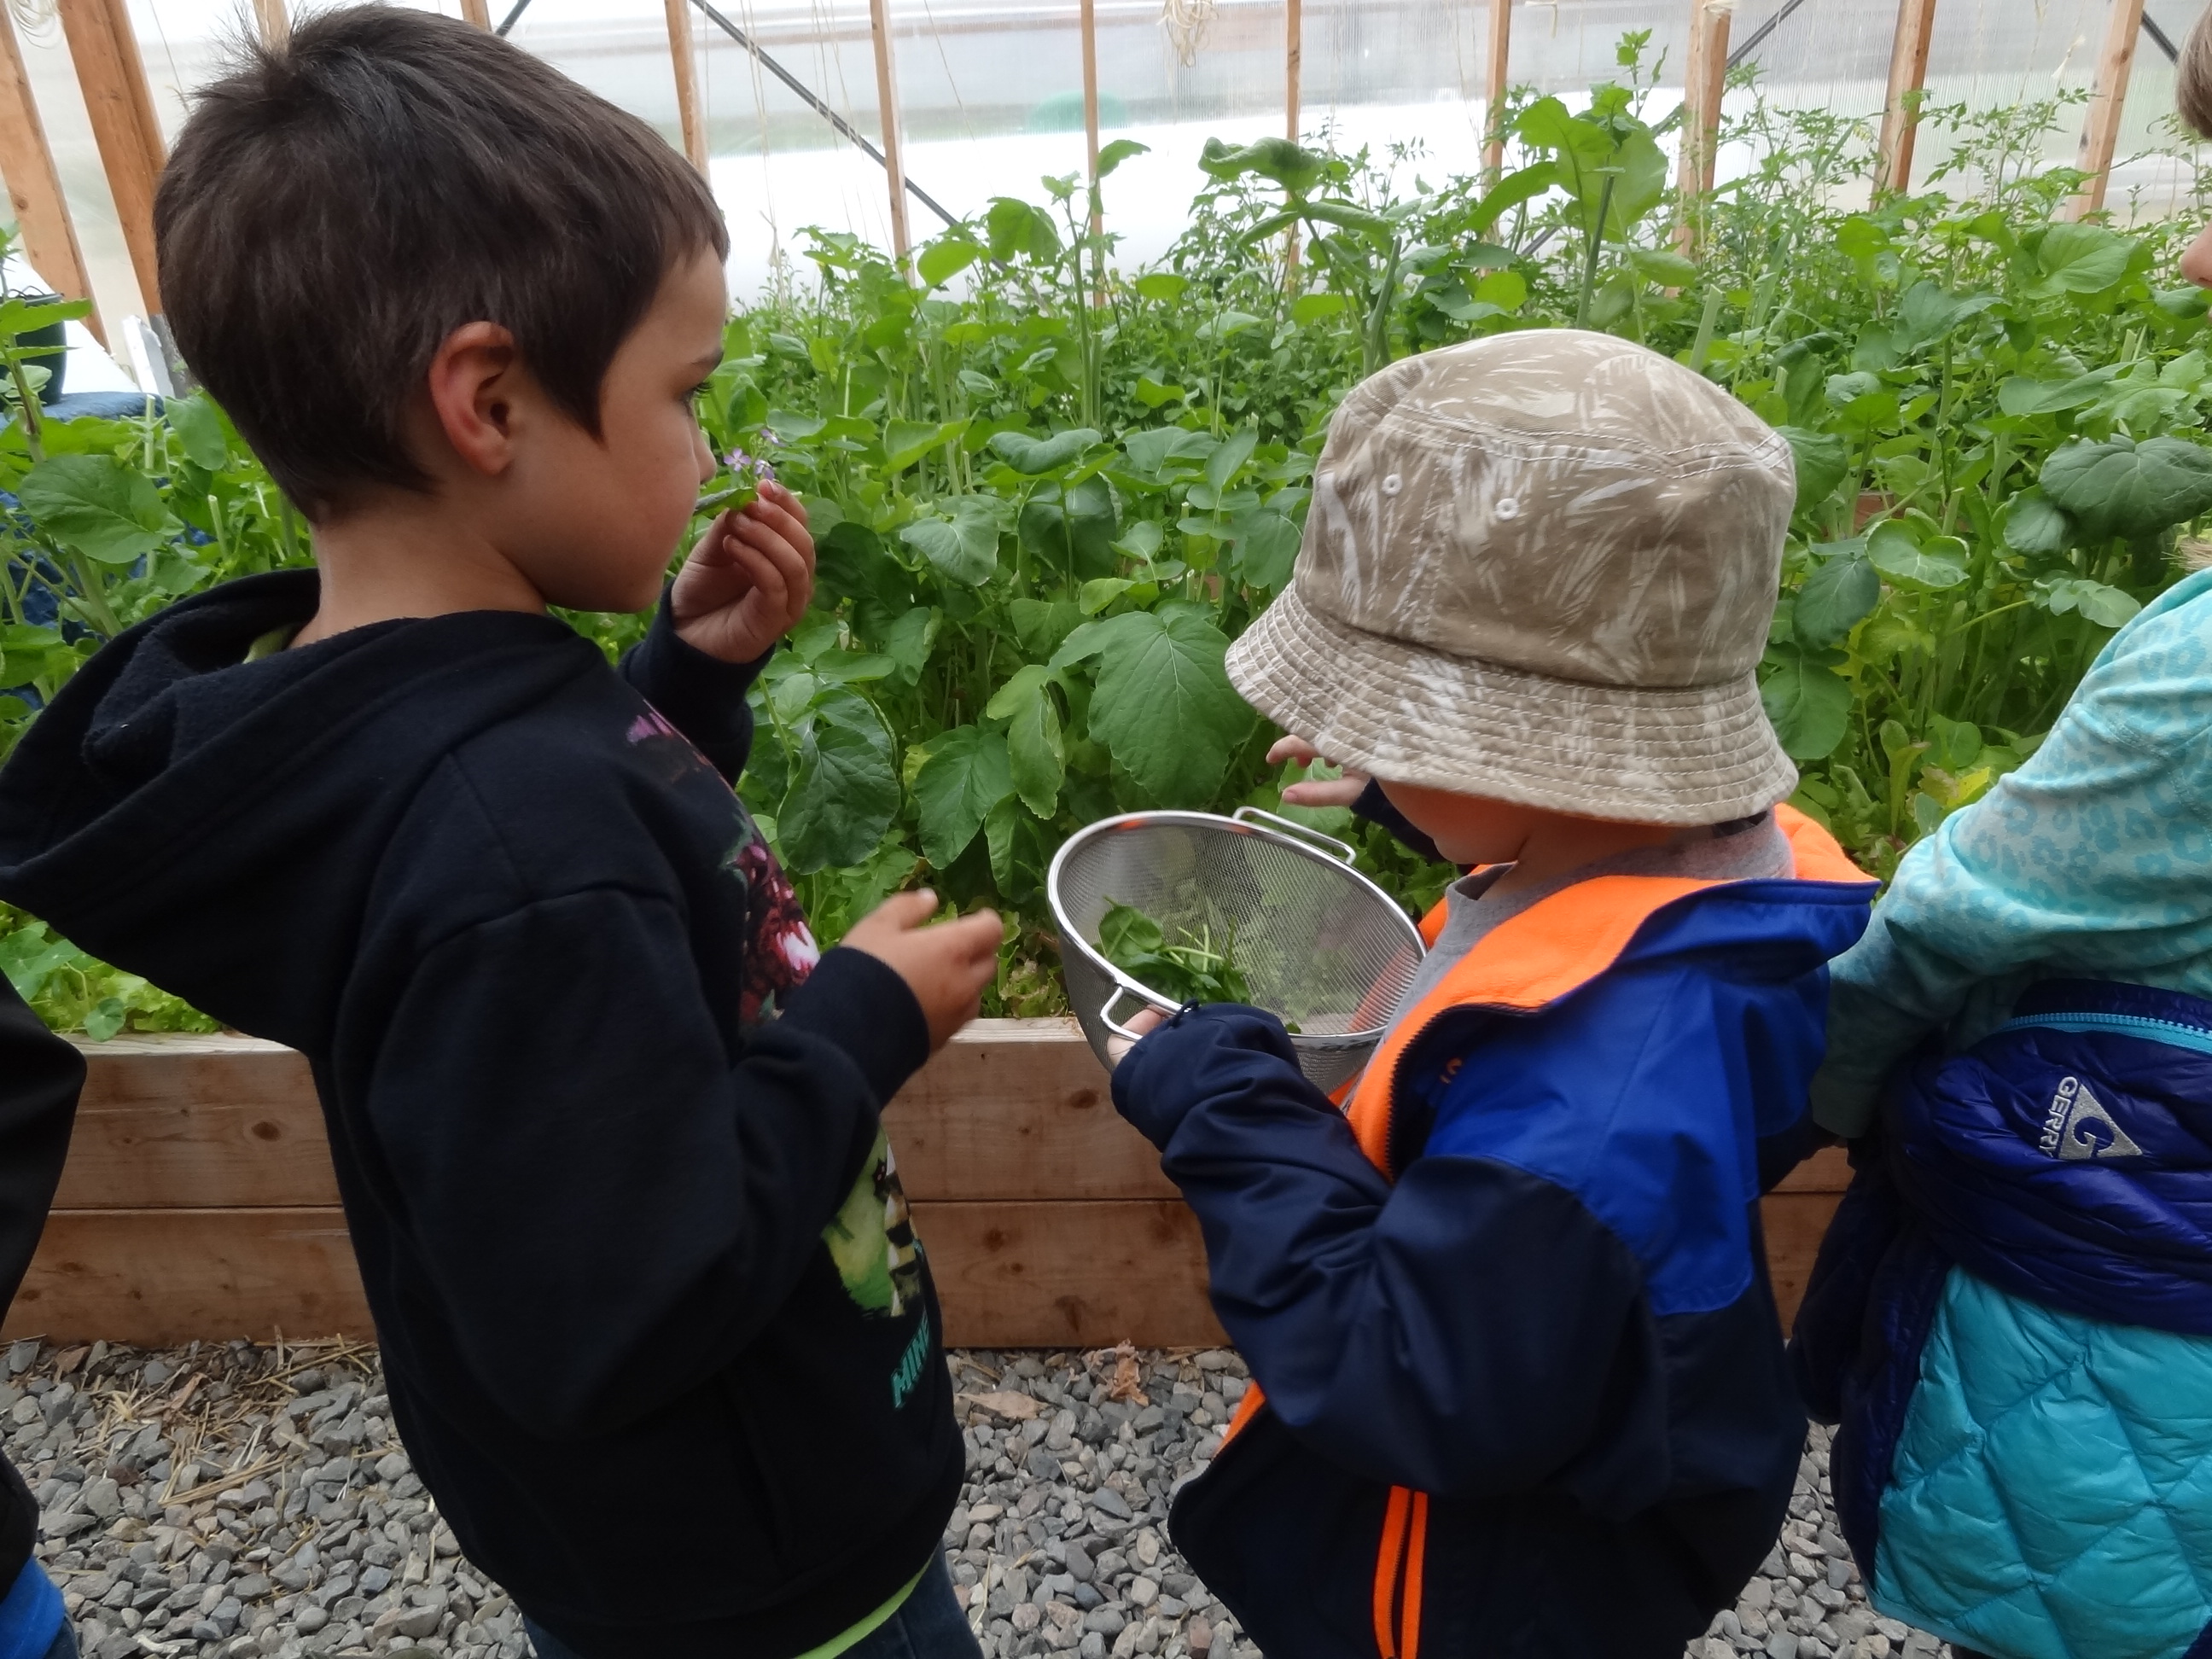 Students trying leafy greens